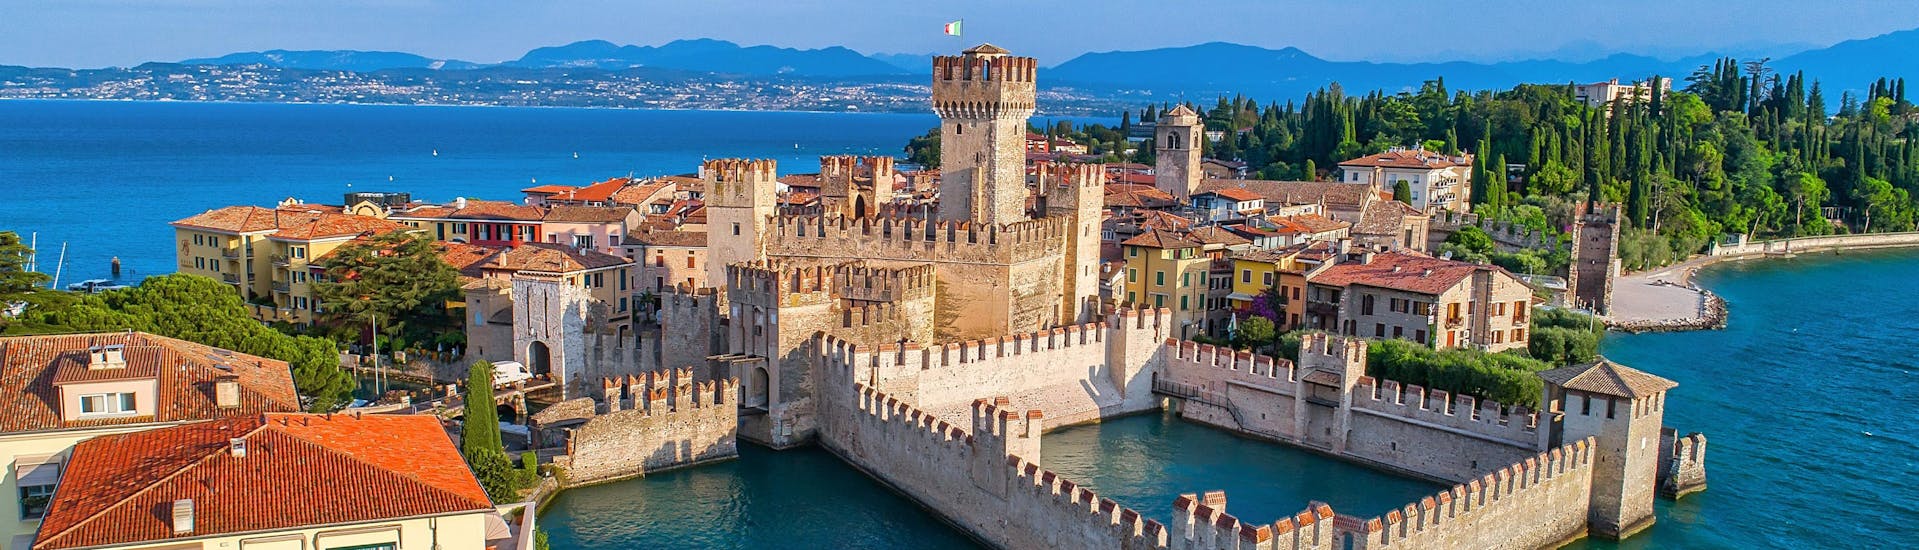 An aerial view of the Scaligero Castle in Sirmione, one of the sights you can see on a boat trip on Lake Garda.